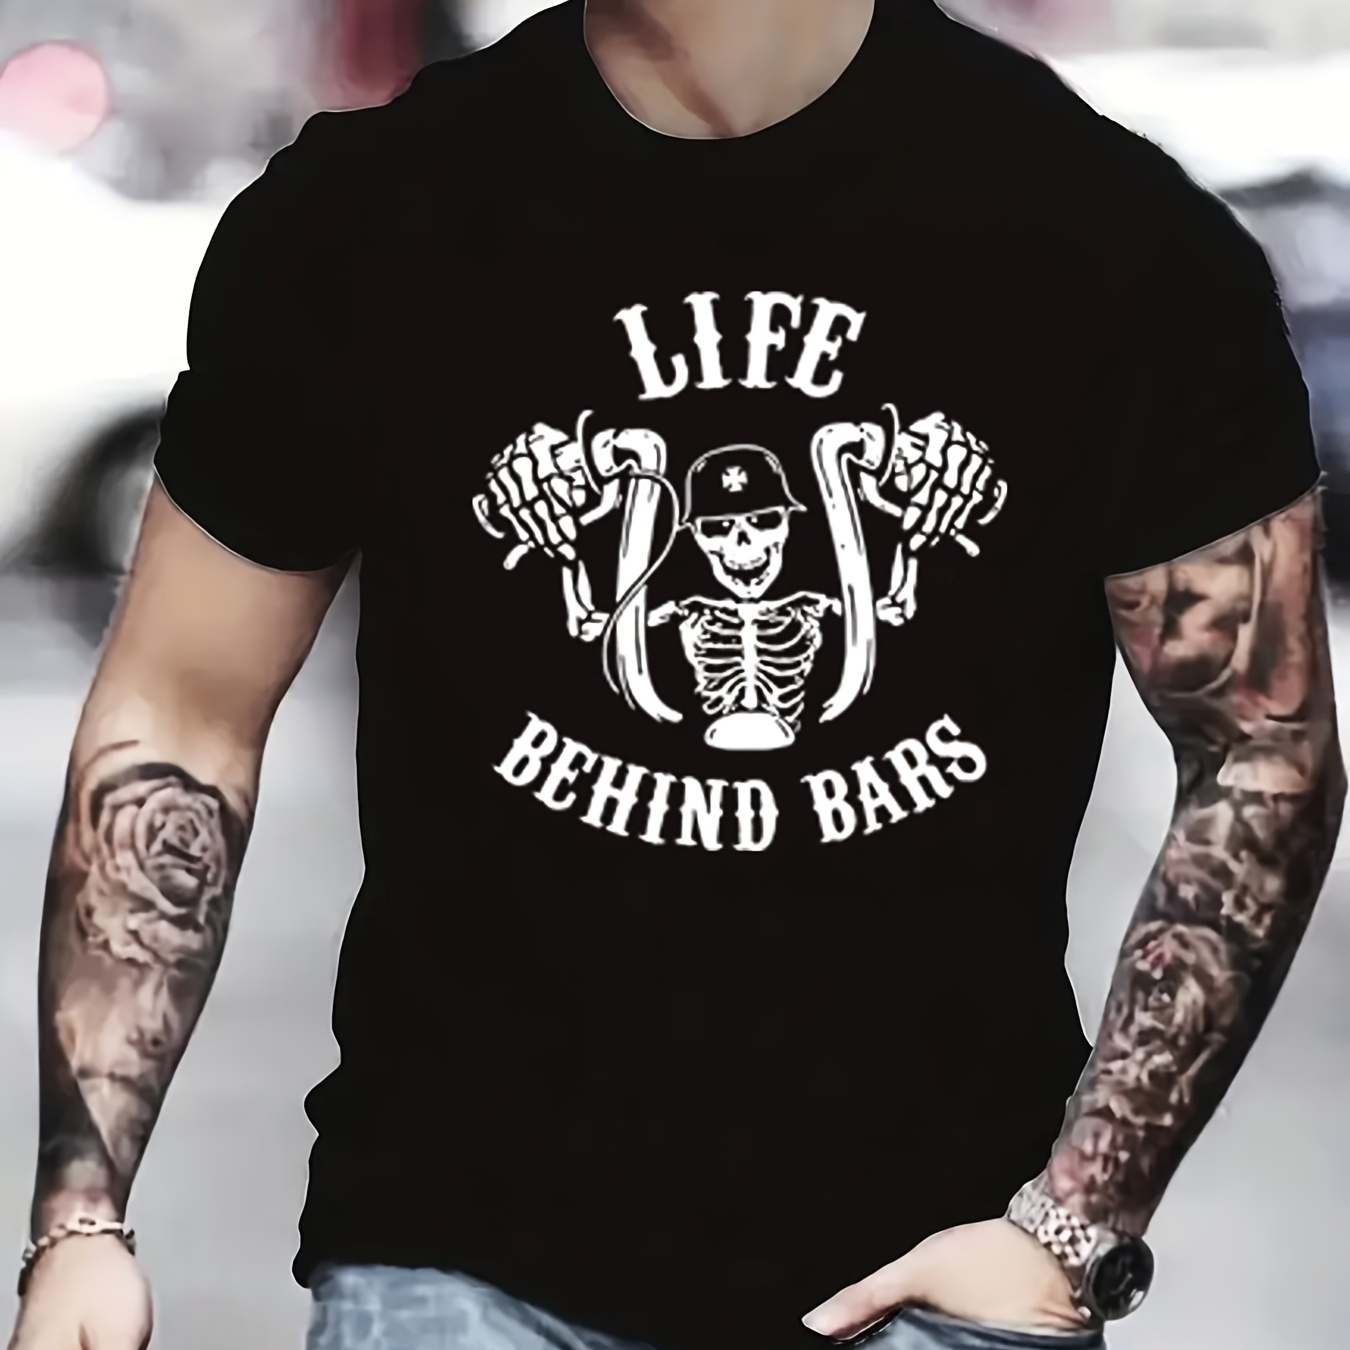 

life Behind Bars" Pattern Print Men's Comfy Chic T-shirt, Graphic Tee Men's Summer Outdoor Clothes, Men's Clothing, Tops For Men, Gift For Men